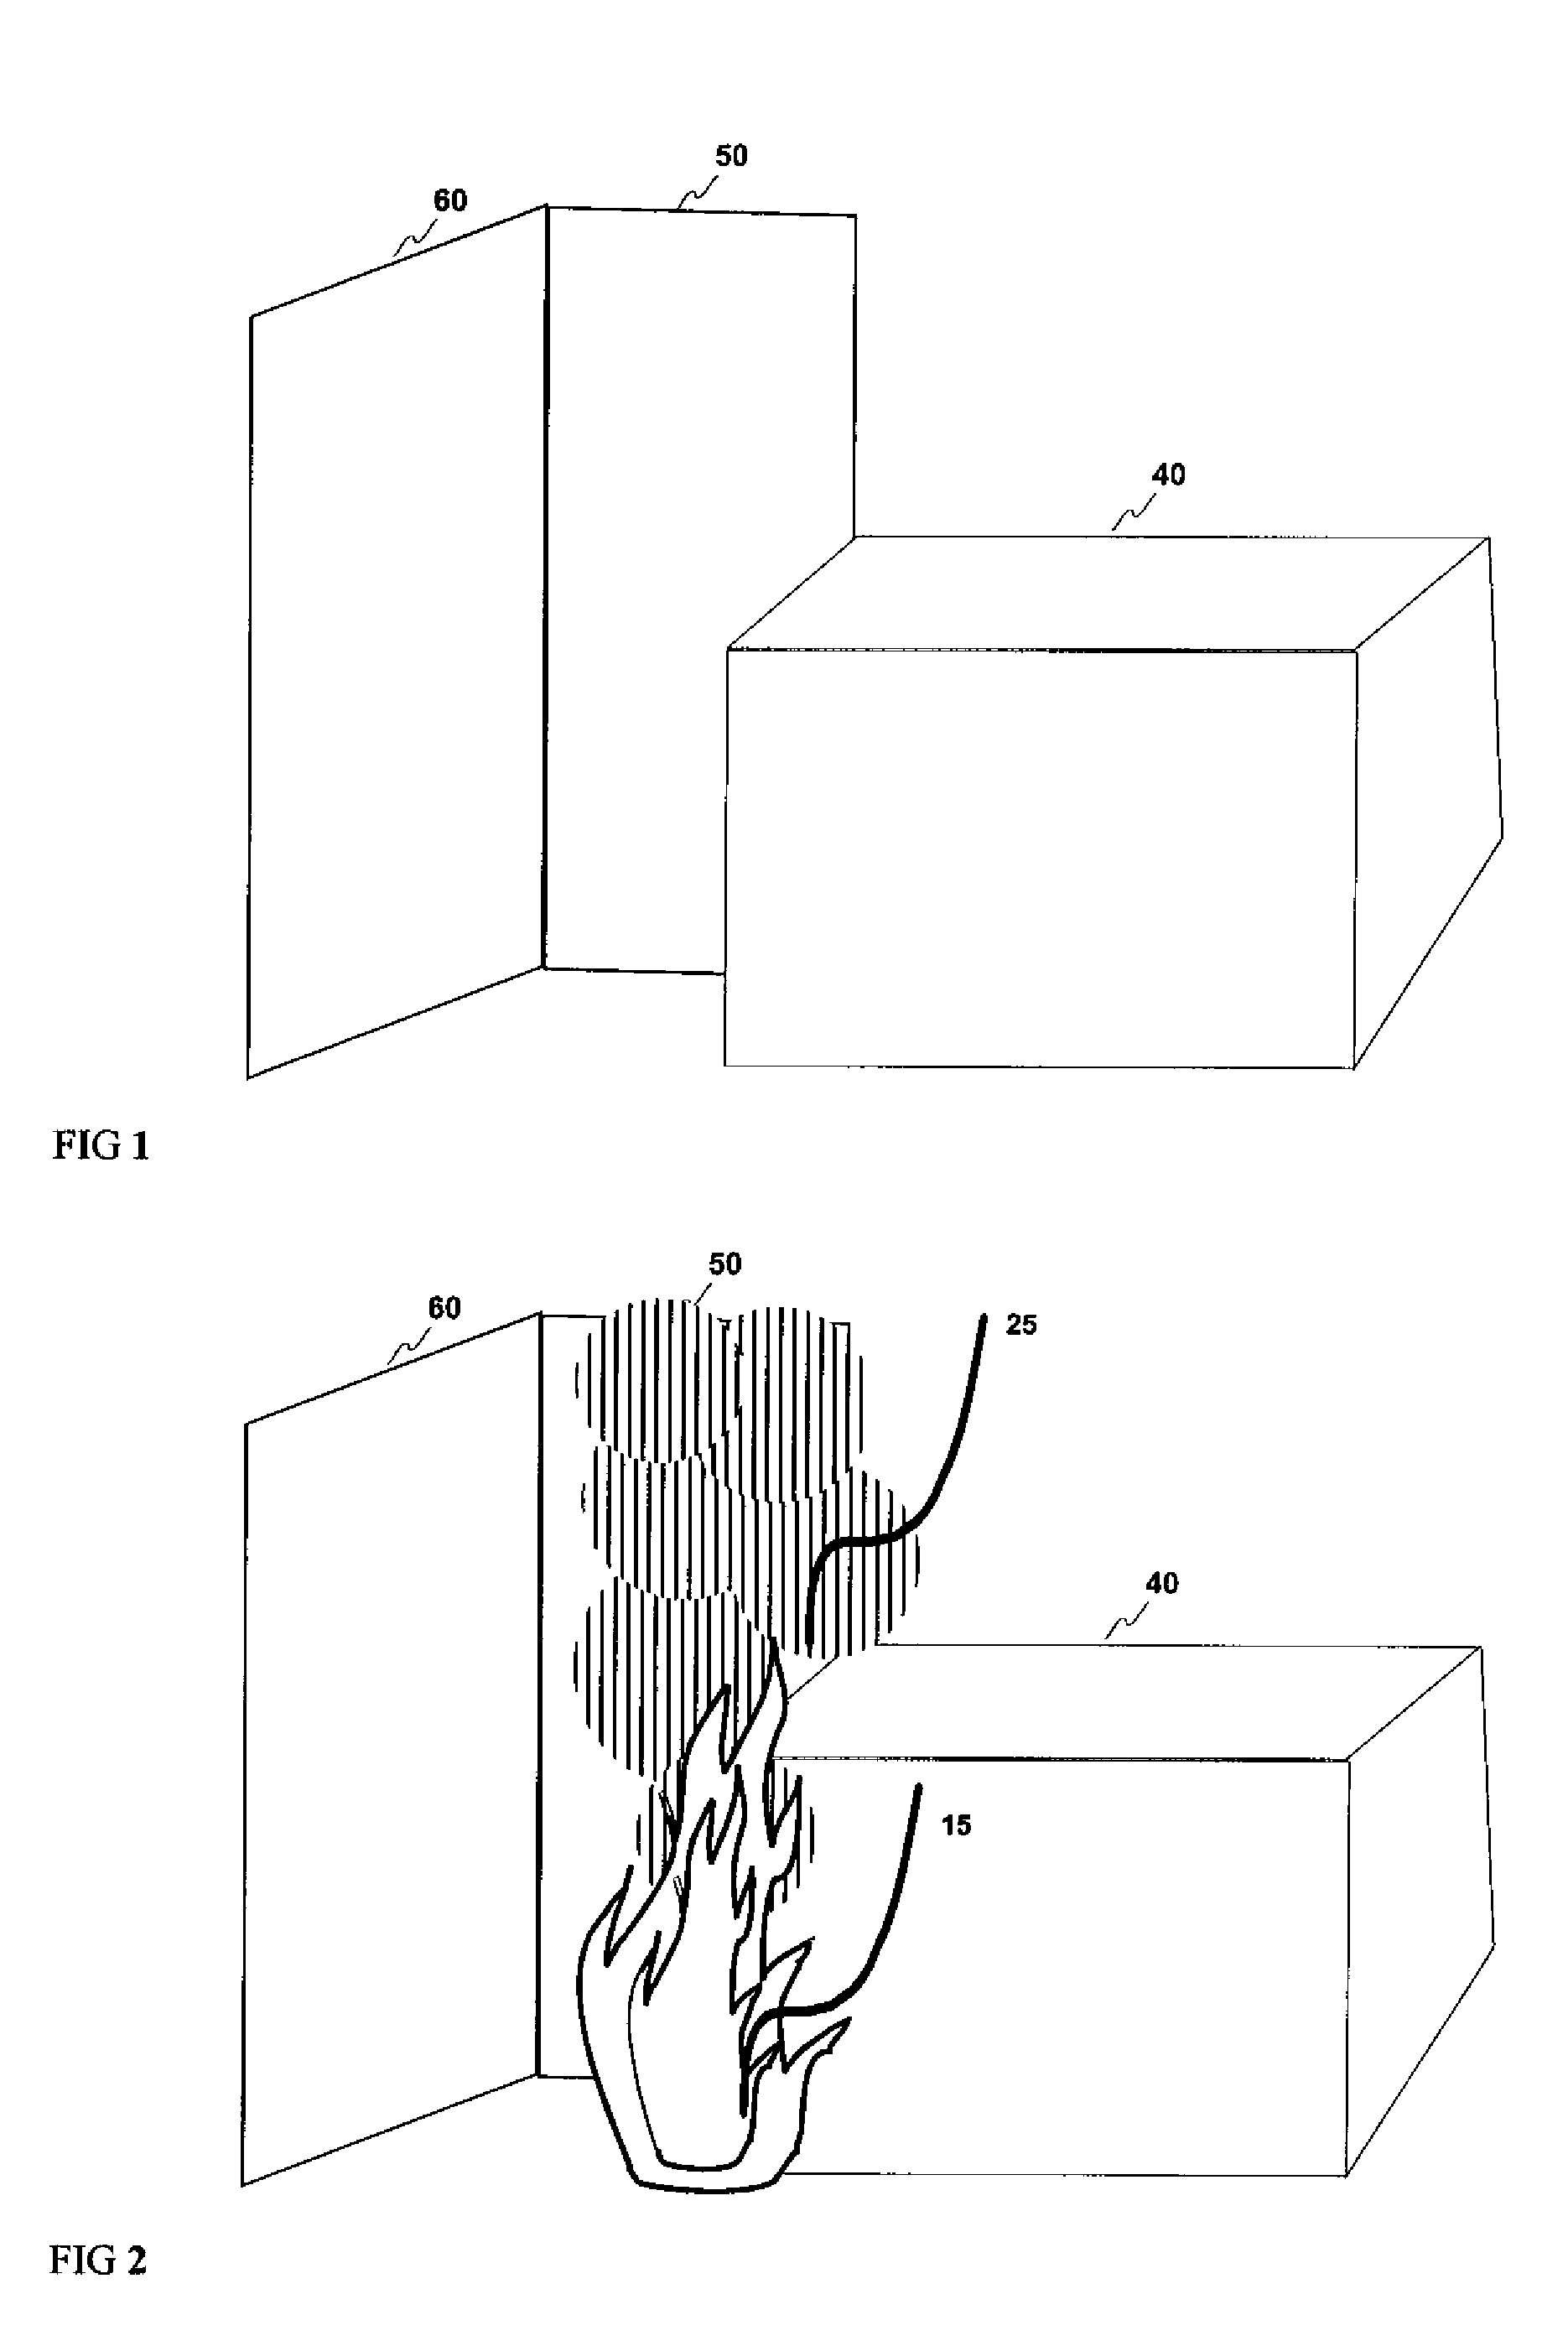 Method and Apparatus for Using Thermal Imaging and Augmented Reality